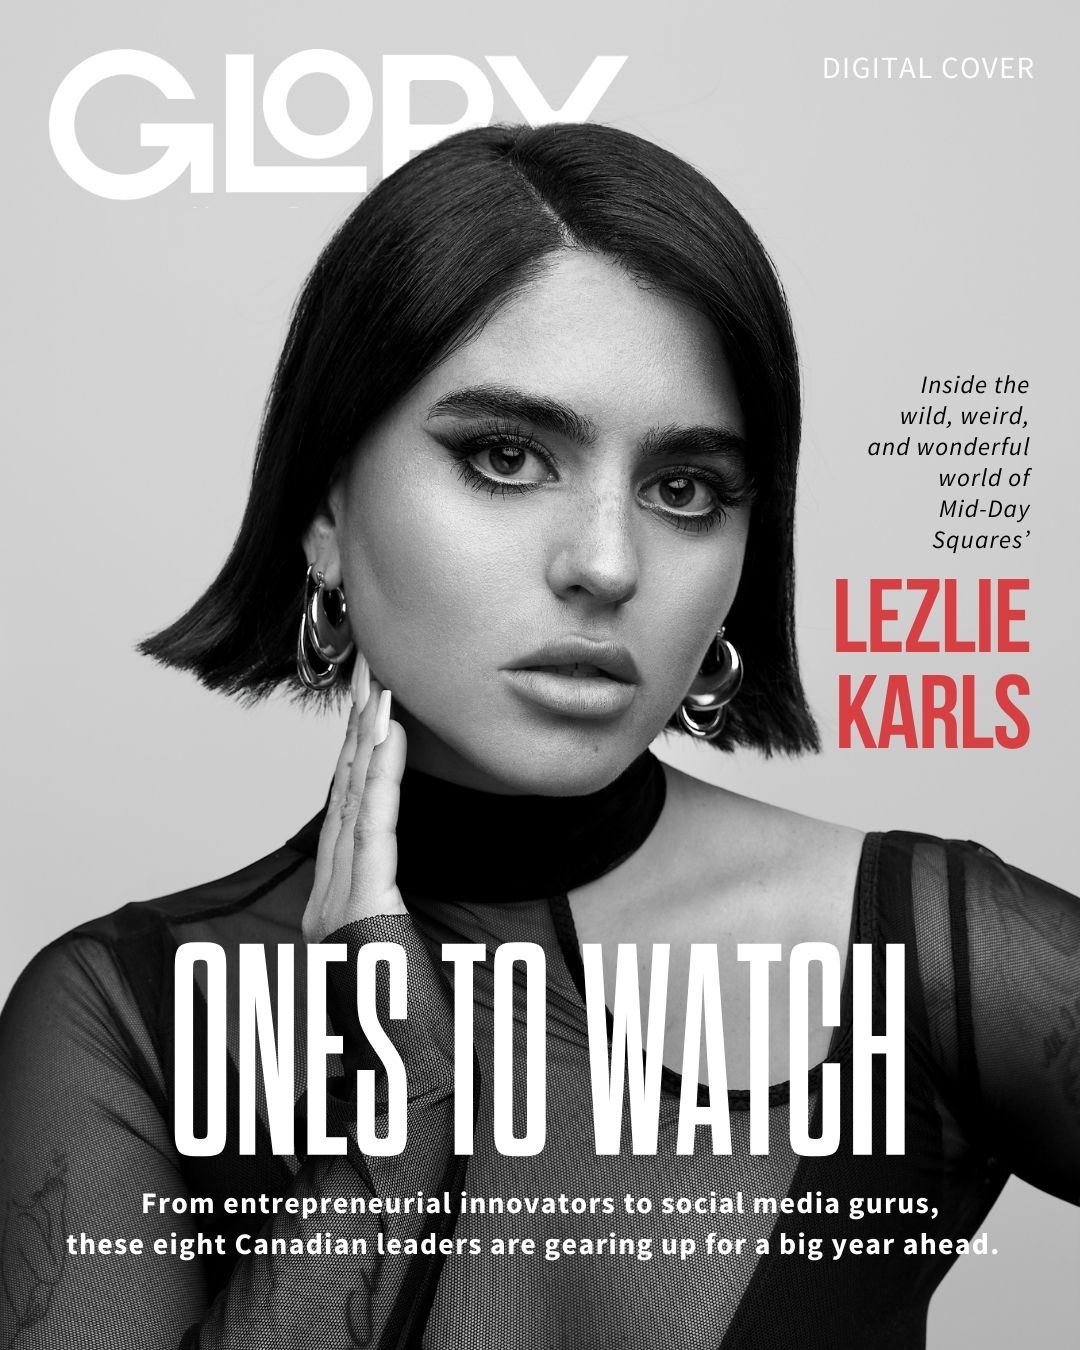 Lezlie Karls on the cover of GLORY magazine. It is a black and white photo of her with cropped hair and a sheer top with text overlaid on top.